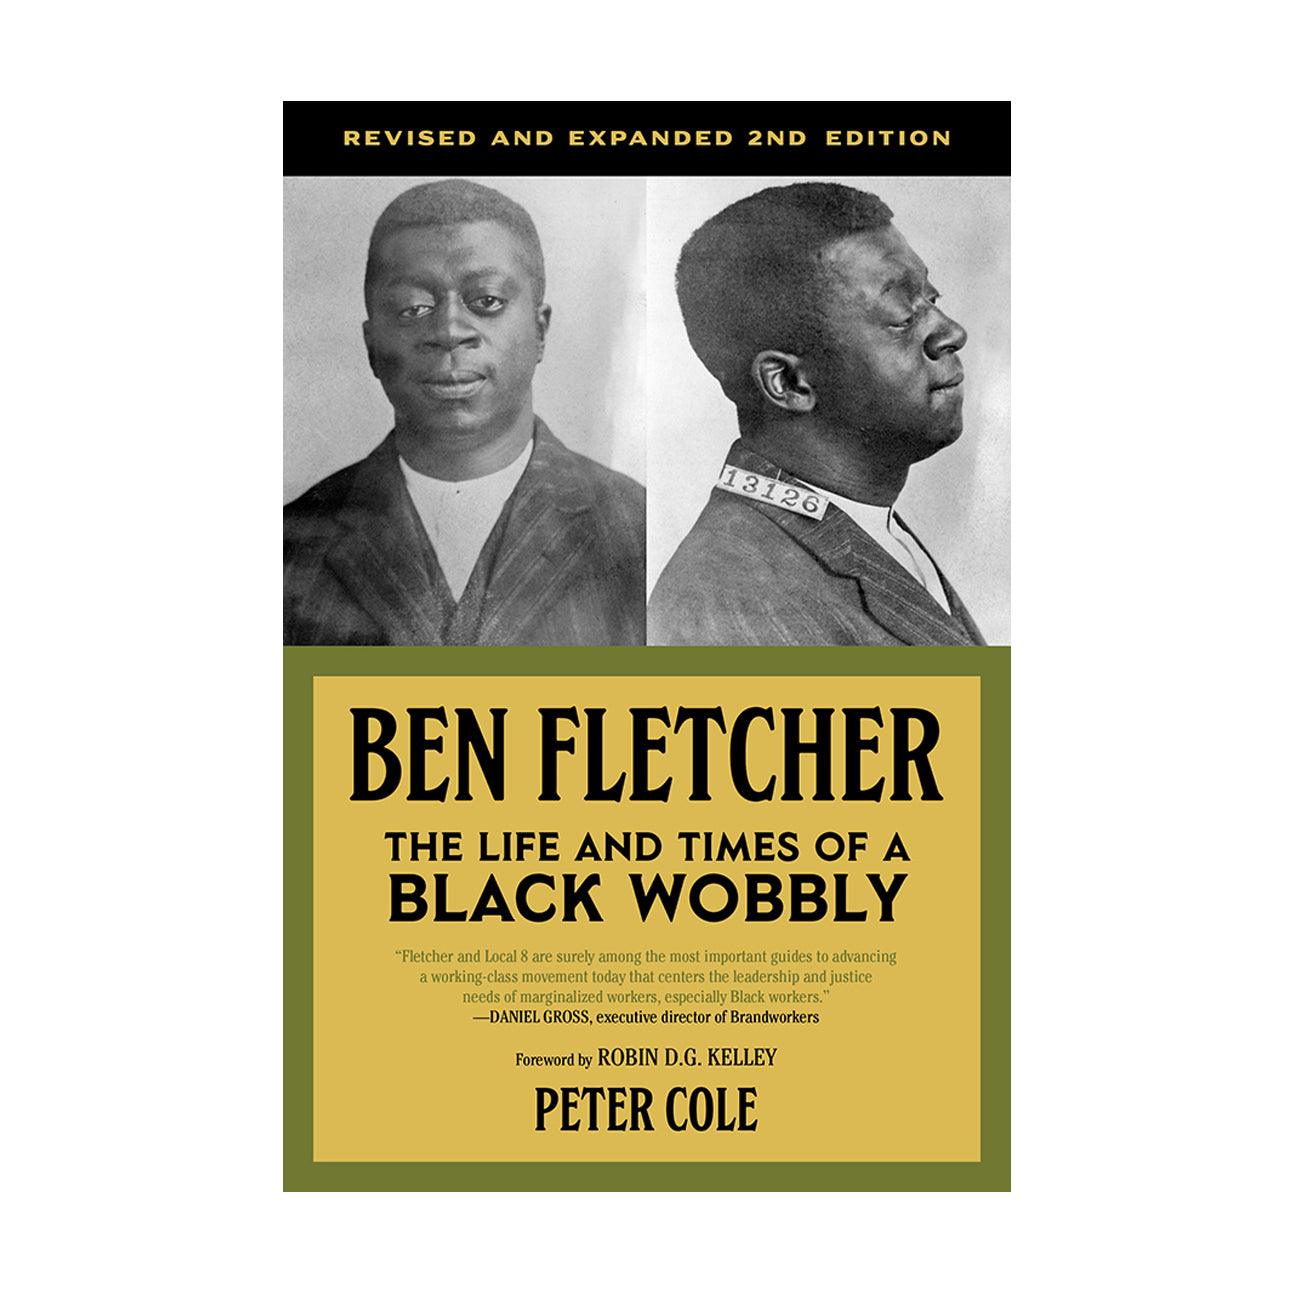 Ben Fletcher: The Life and Times of a Black Wobbly – Peter Cole by Working Class History | Shop - Vysn